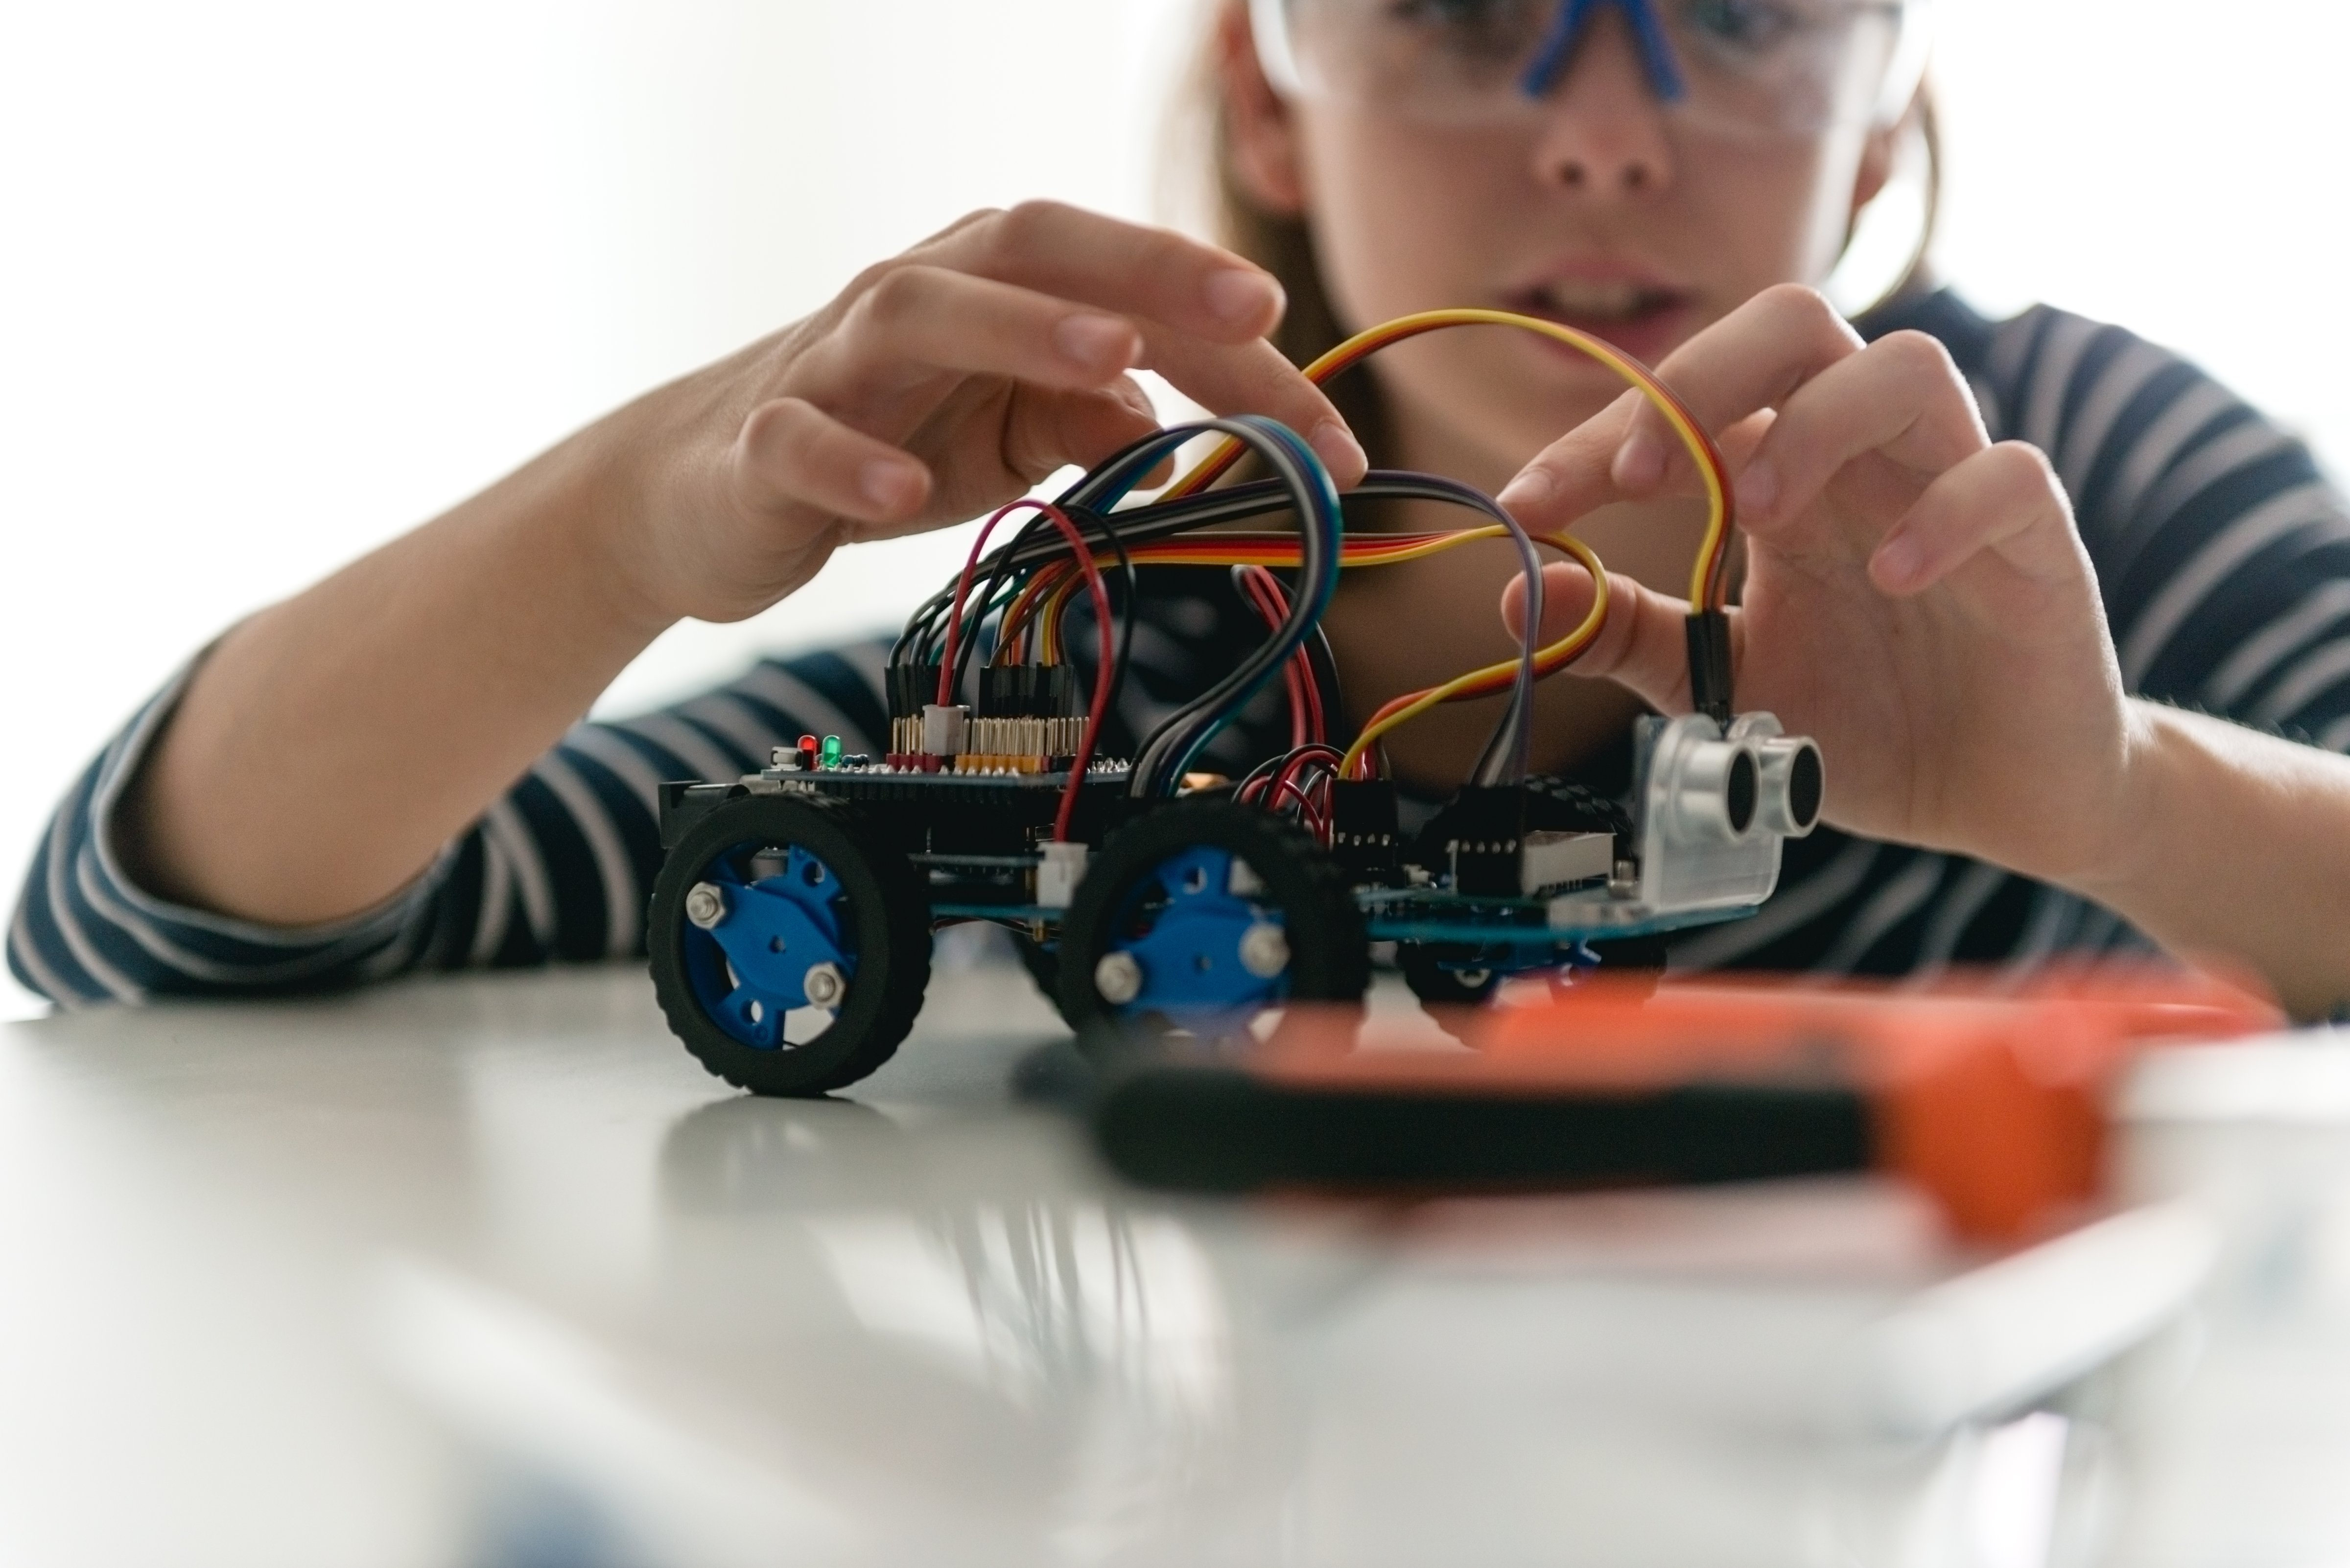 Building her own robotic car